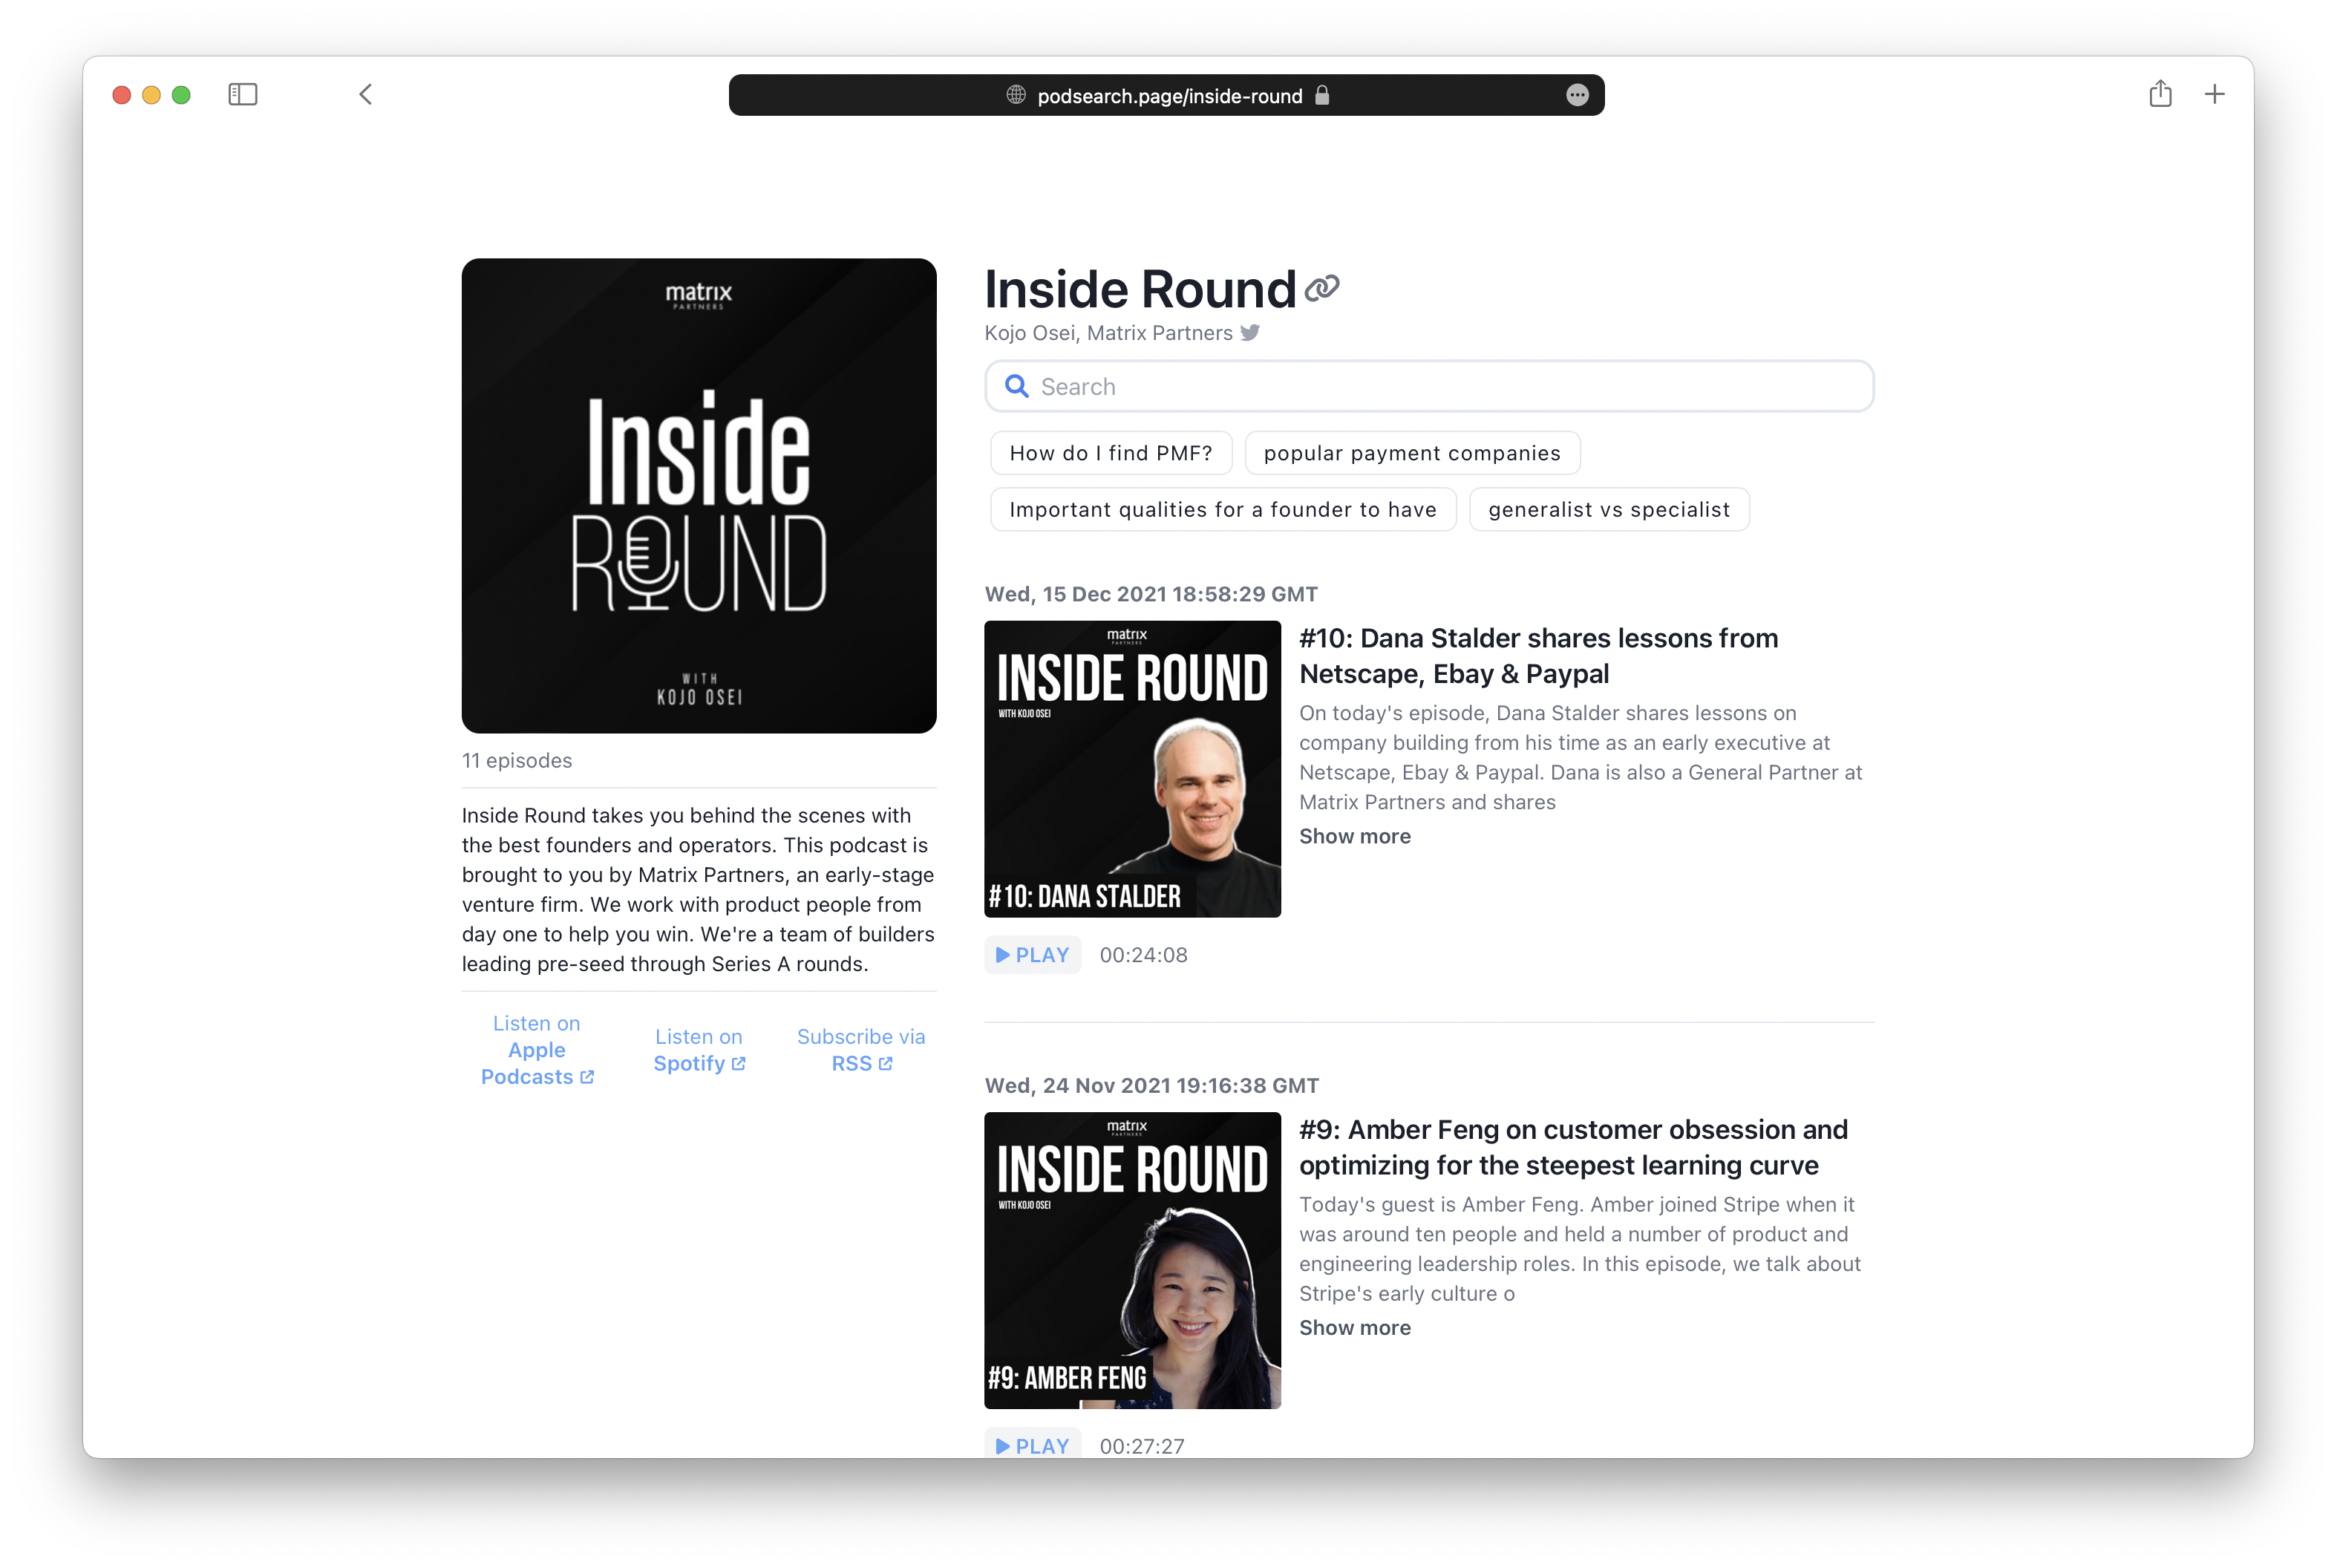 Inside Round Podcast Search